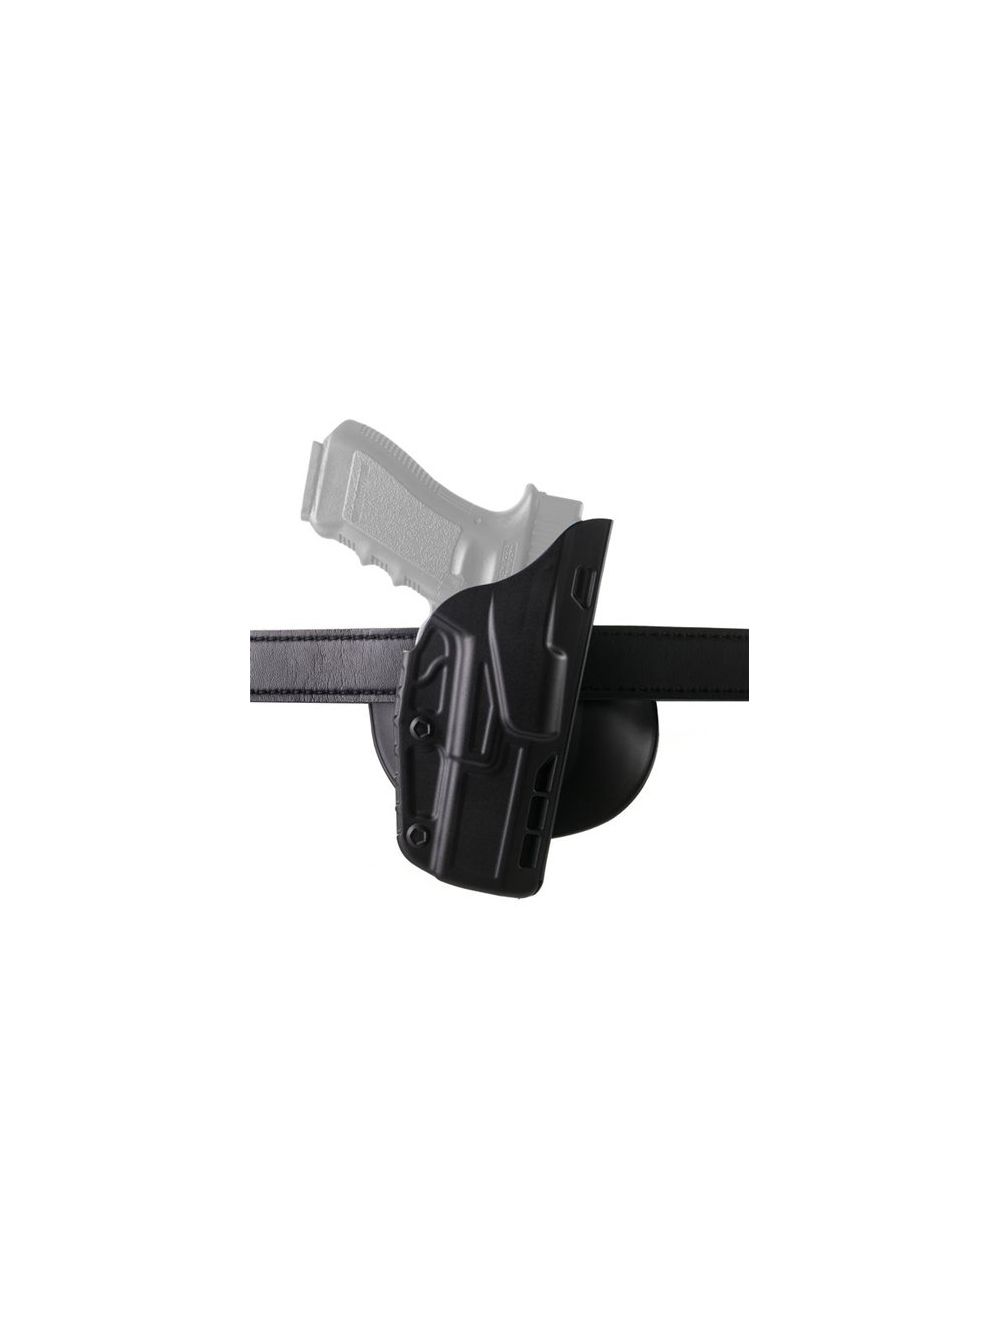 Model 7378 7TS ALS Concealment Paddle and Belt Loop Combo Holster for Smith & Wesson M&P 9